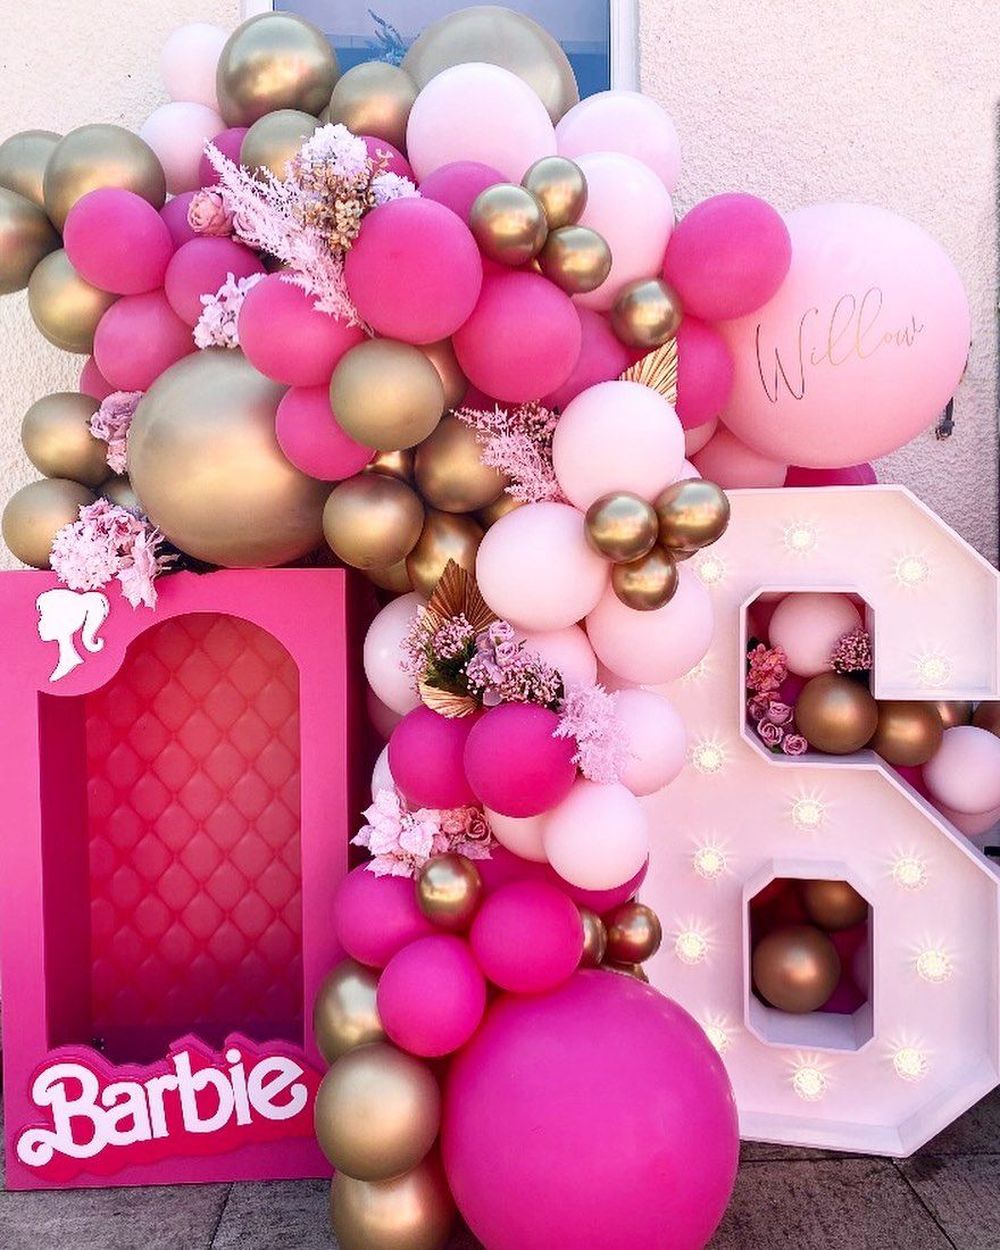 Barbie Party Themed